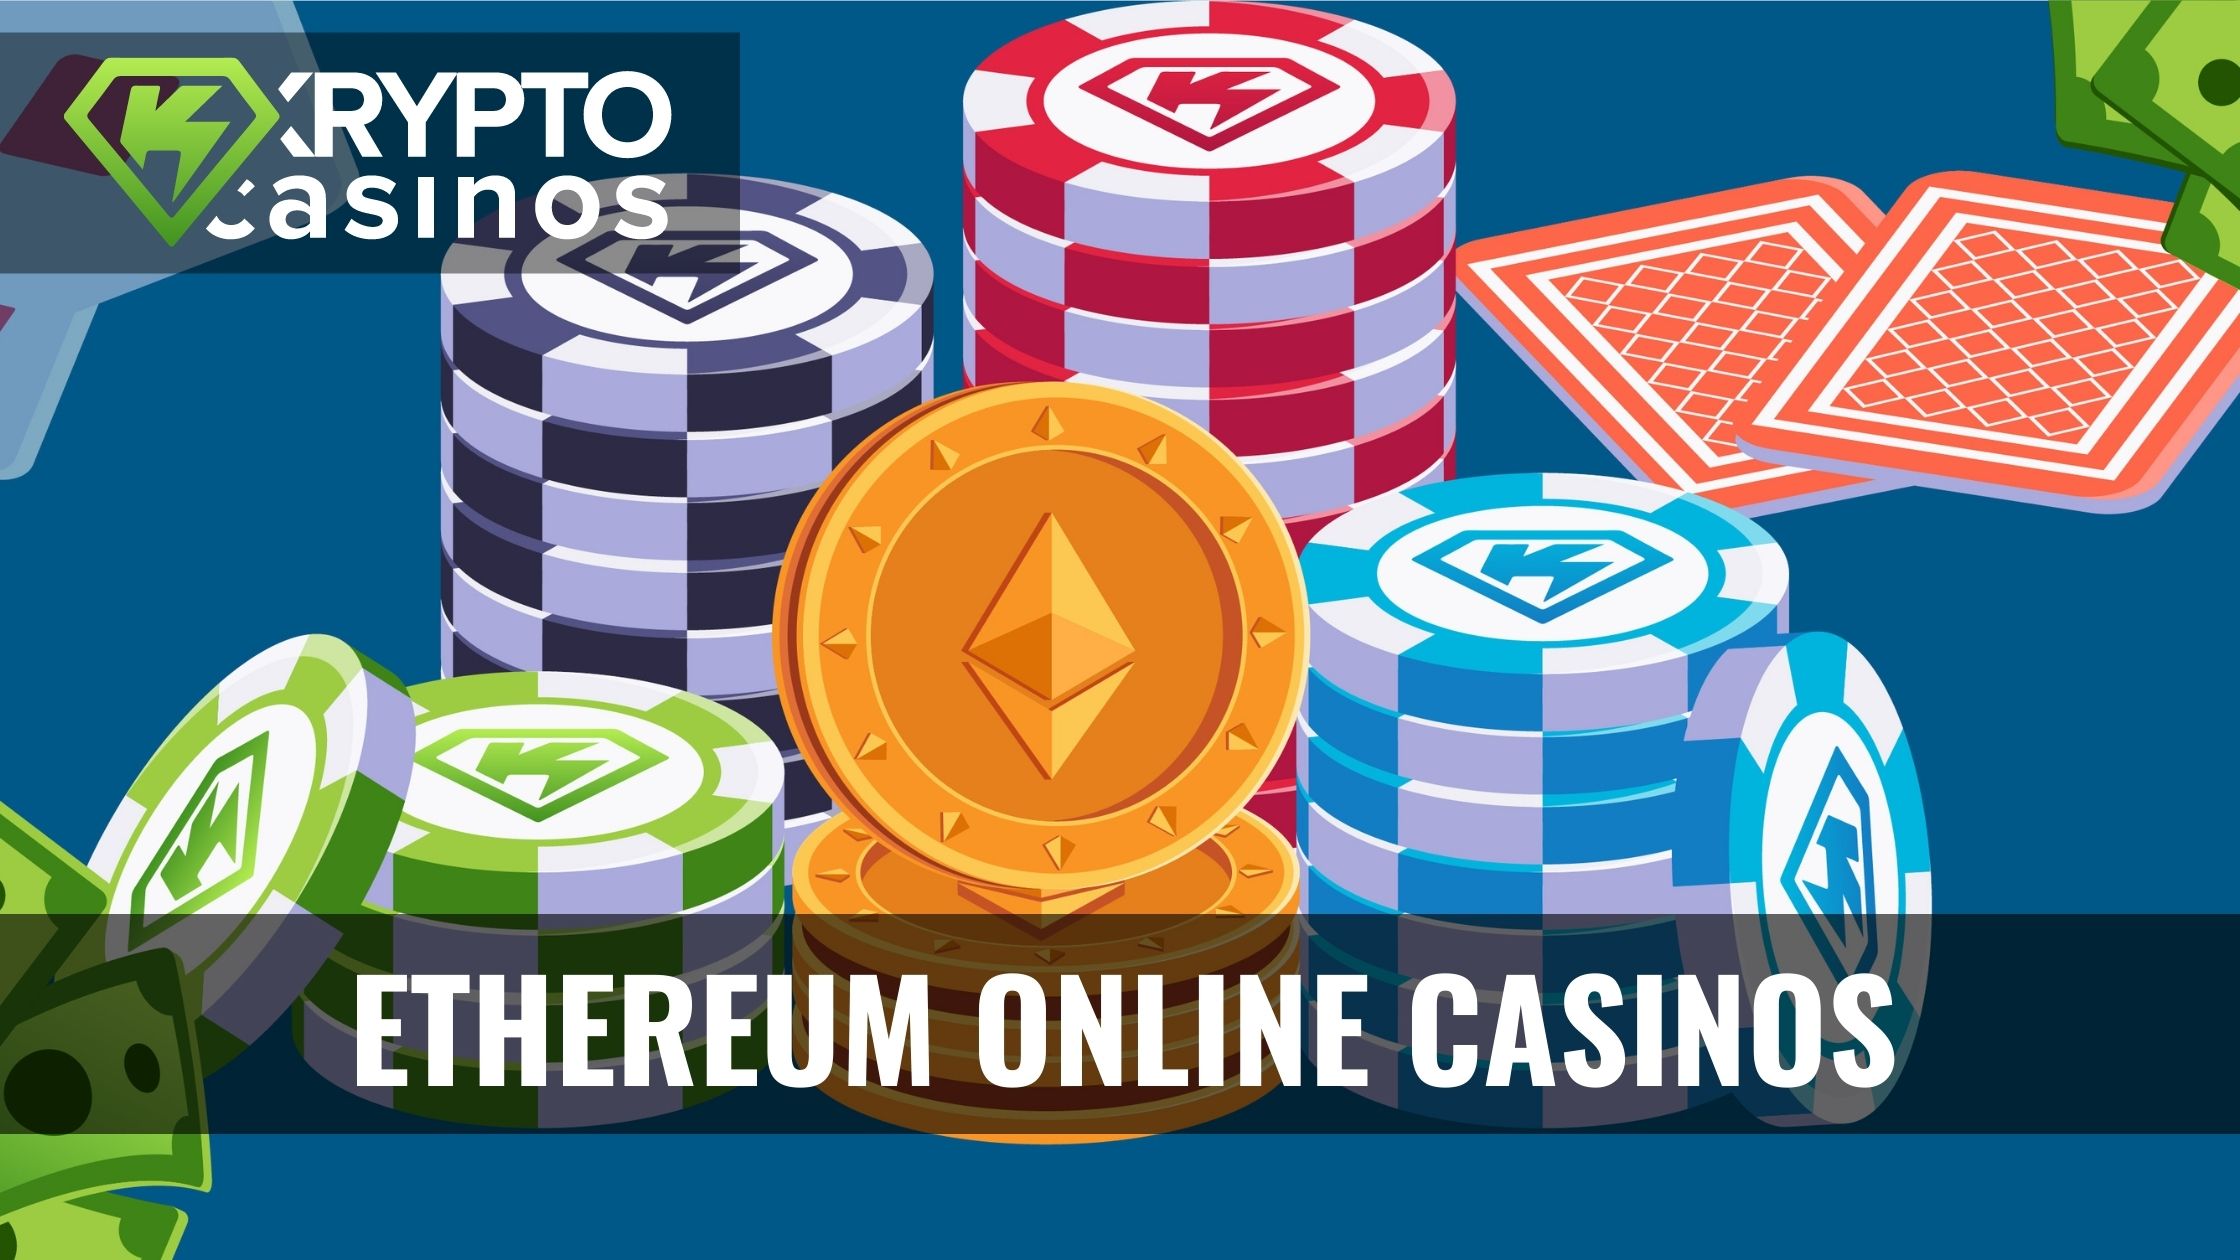 5 Emerging Crypto Casinos Trends To Watch In 2021